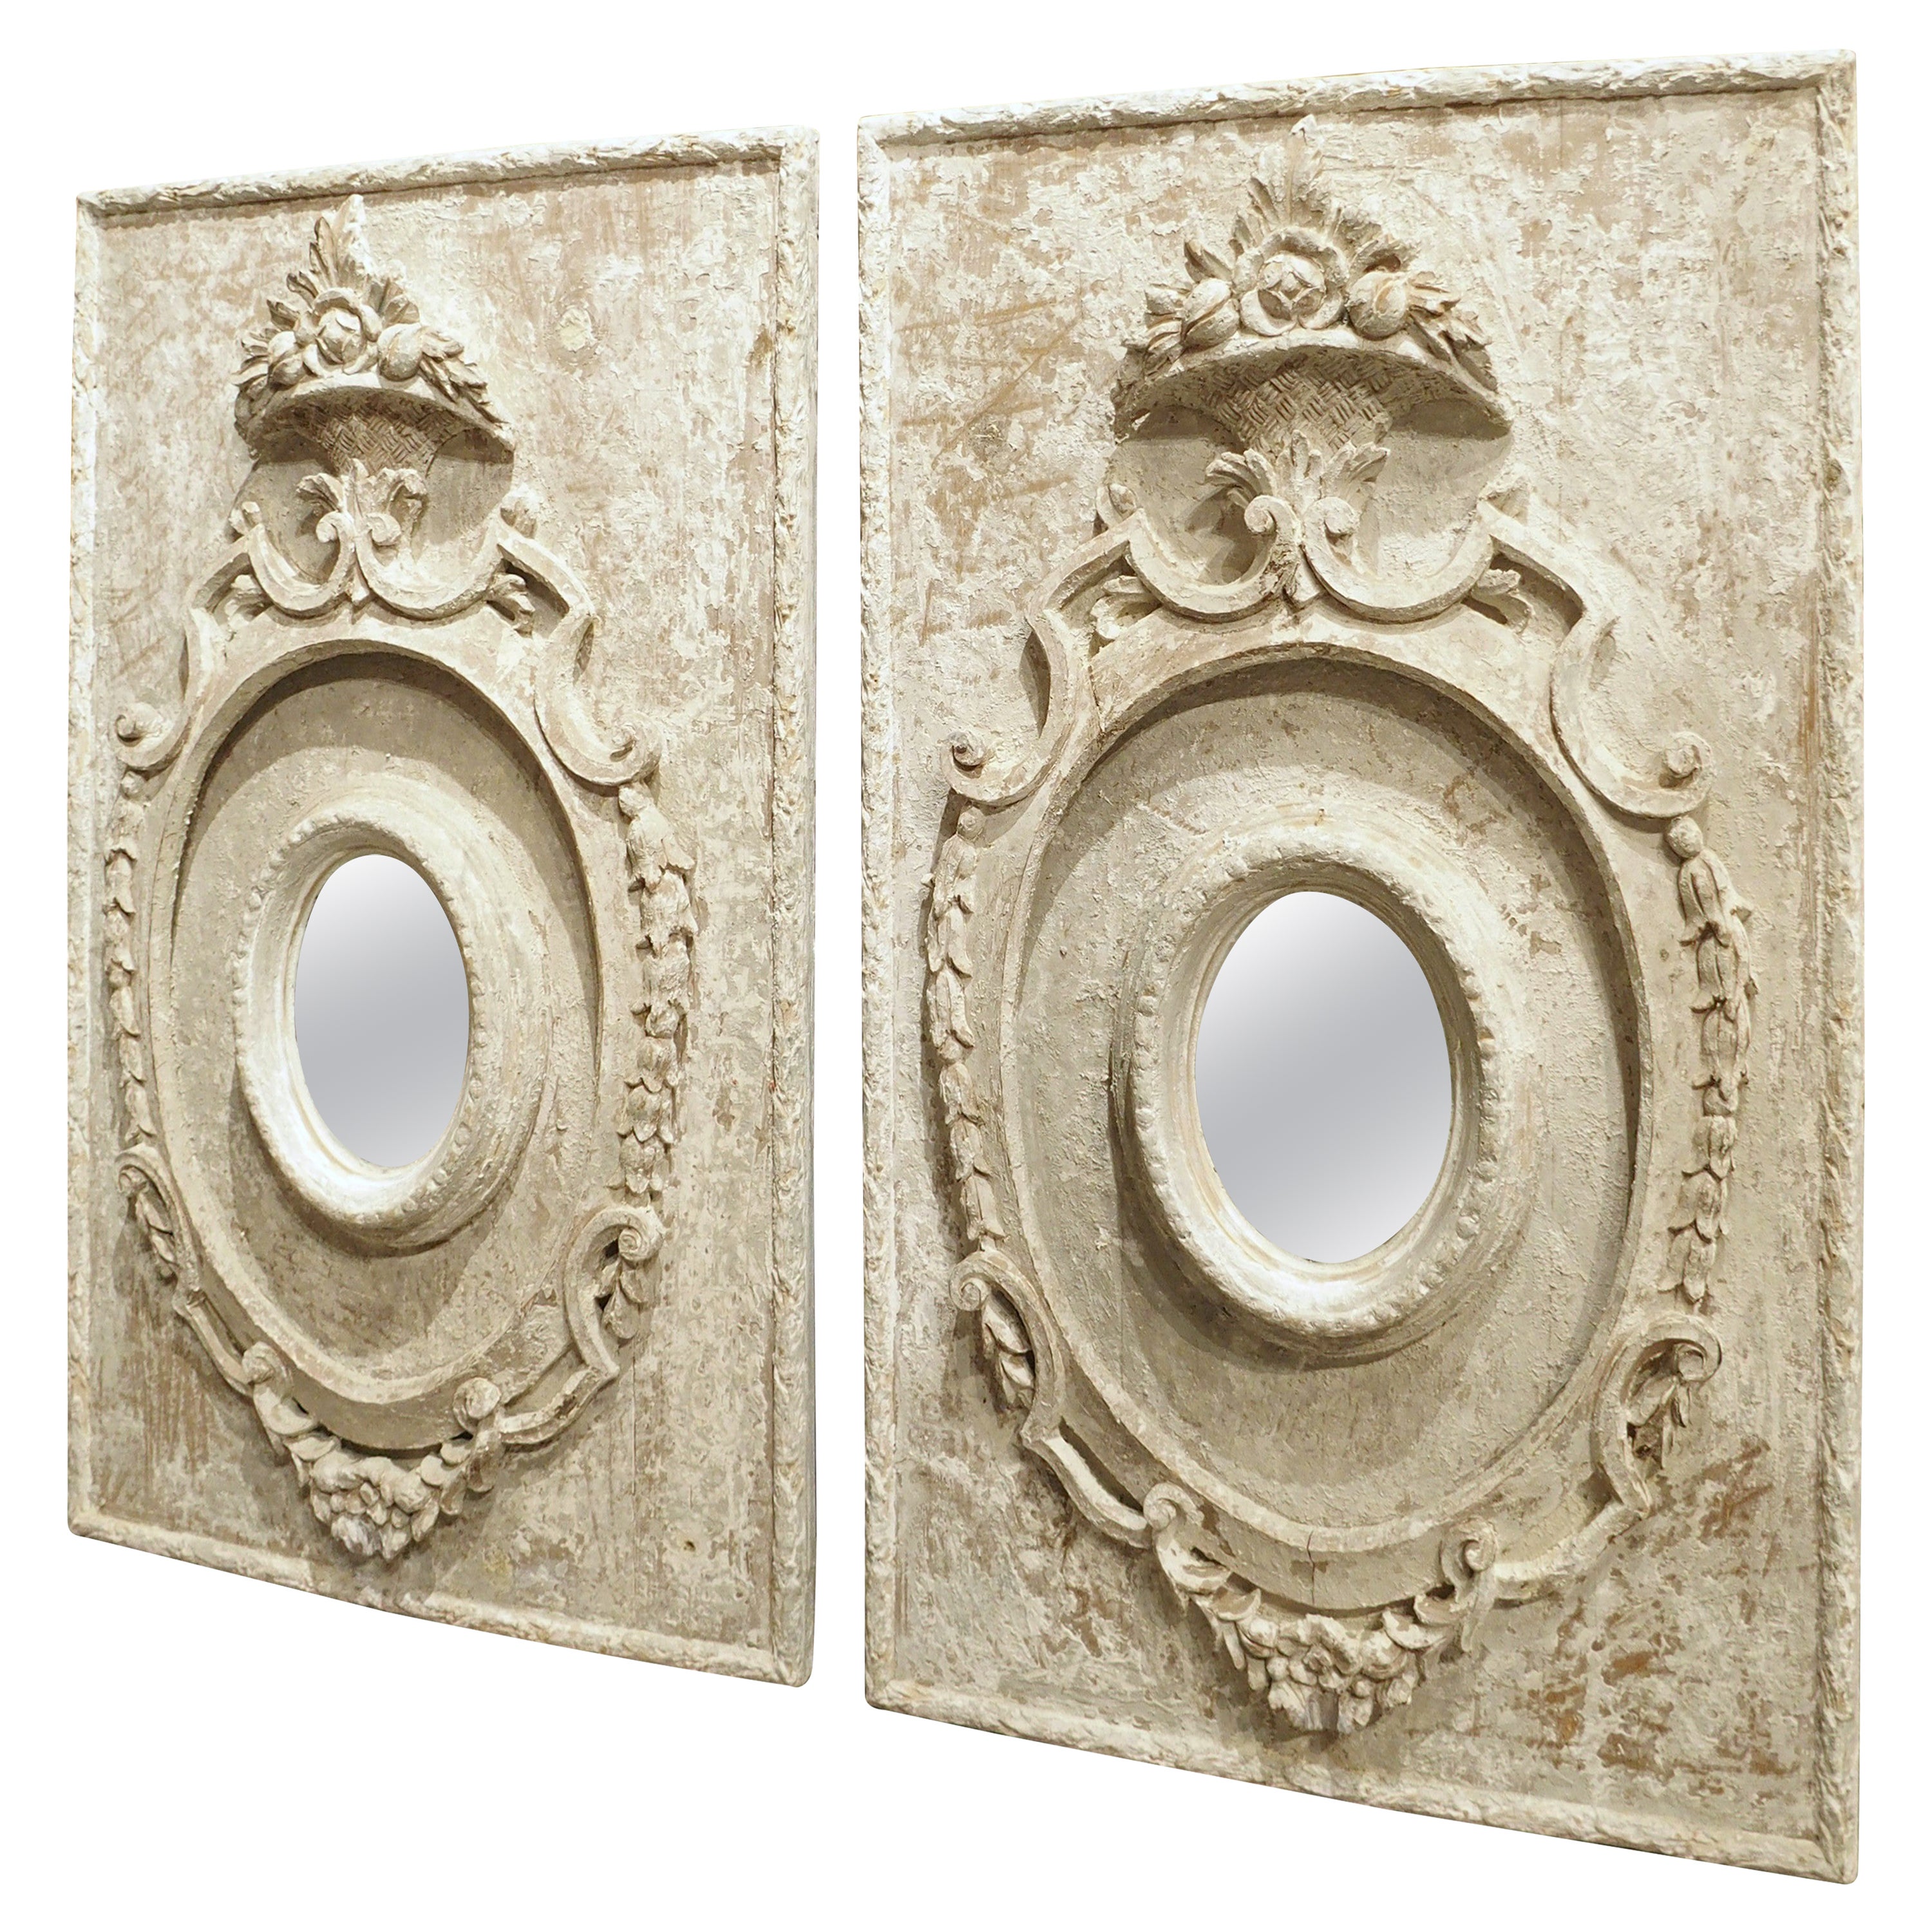 Pair of Vintage Painted Cartouche Panels with Oval Mirrors from Florence, Italy